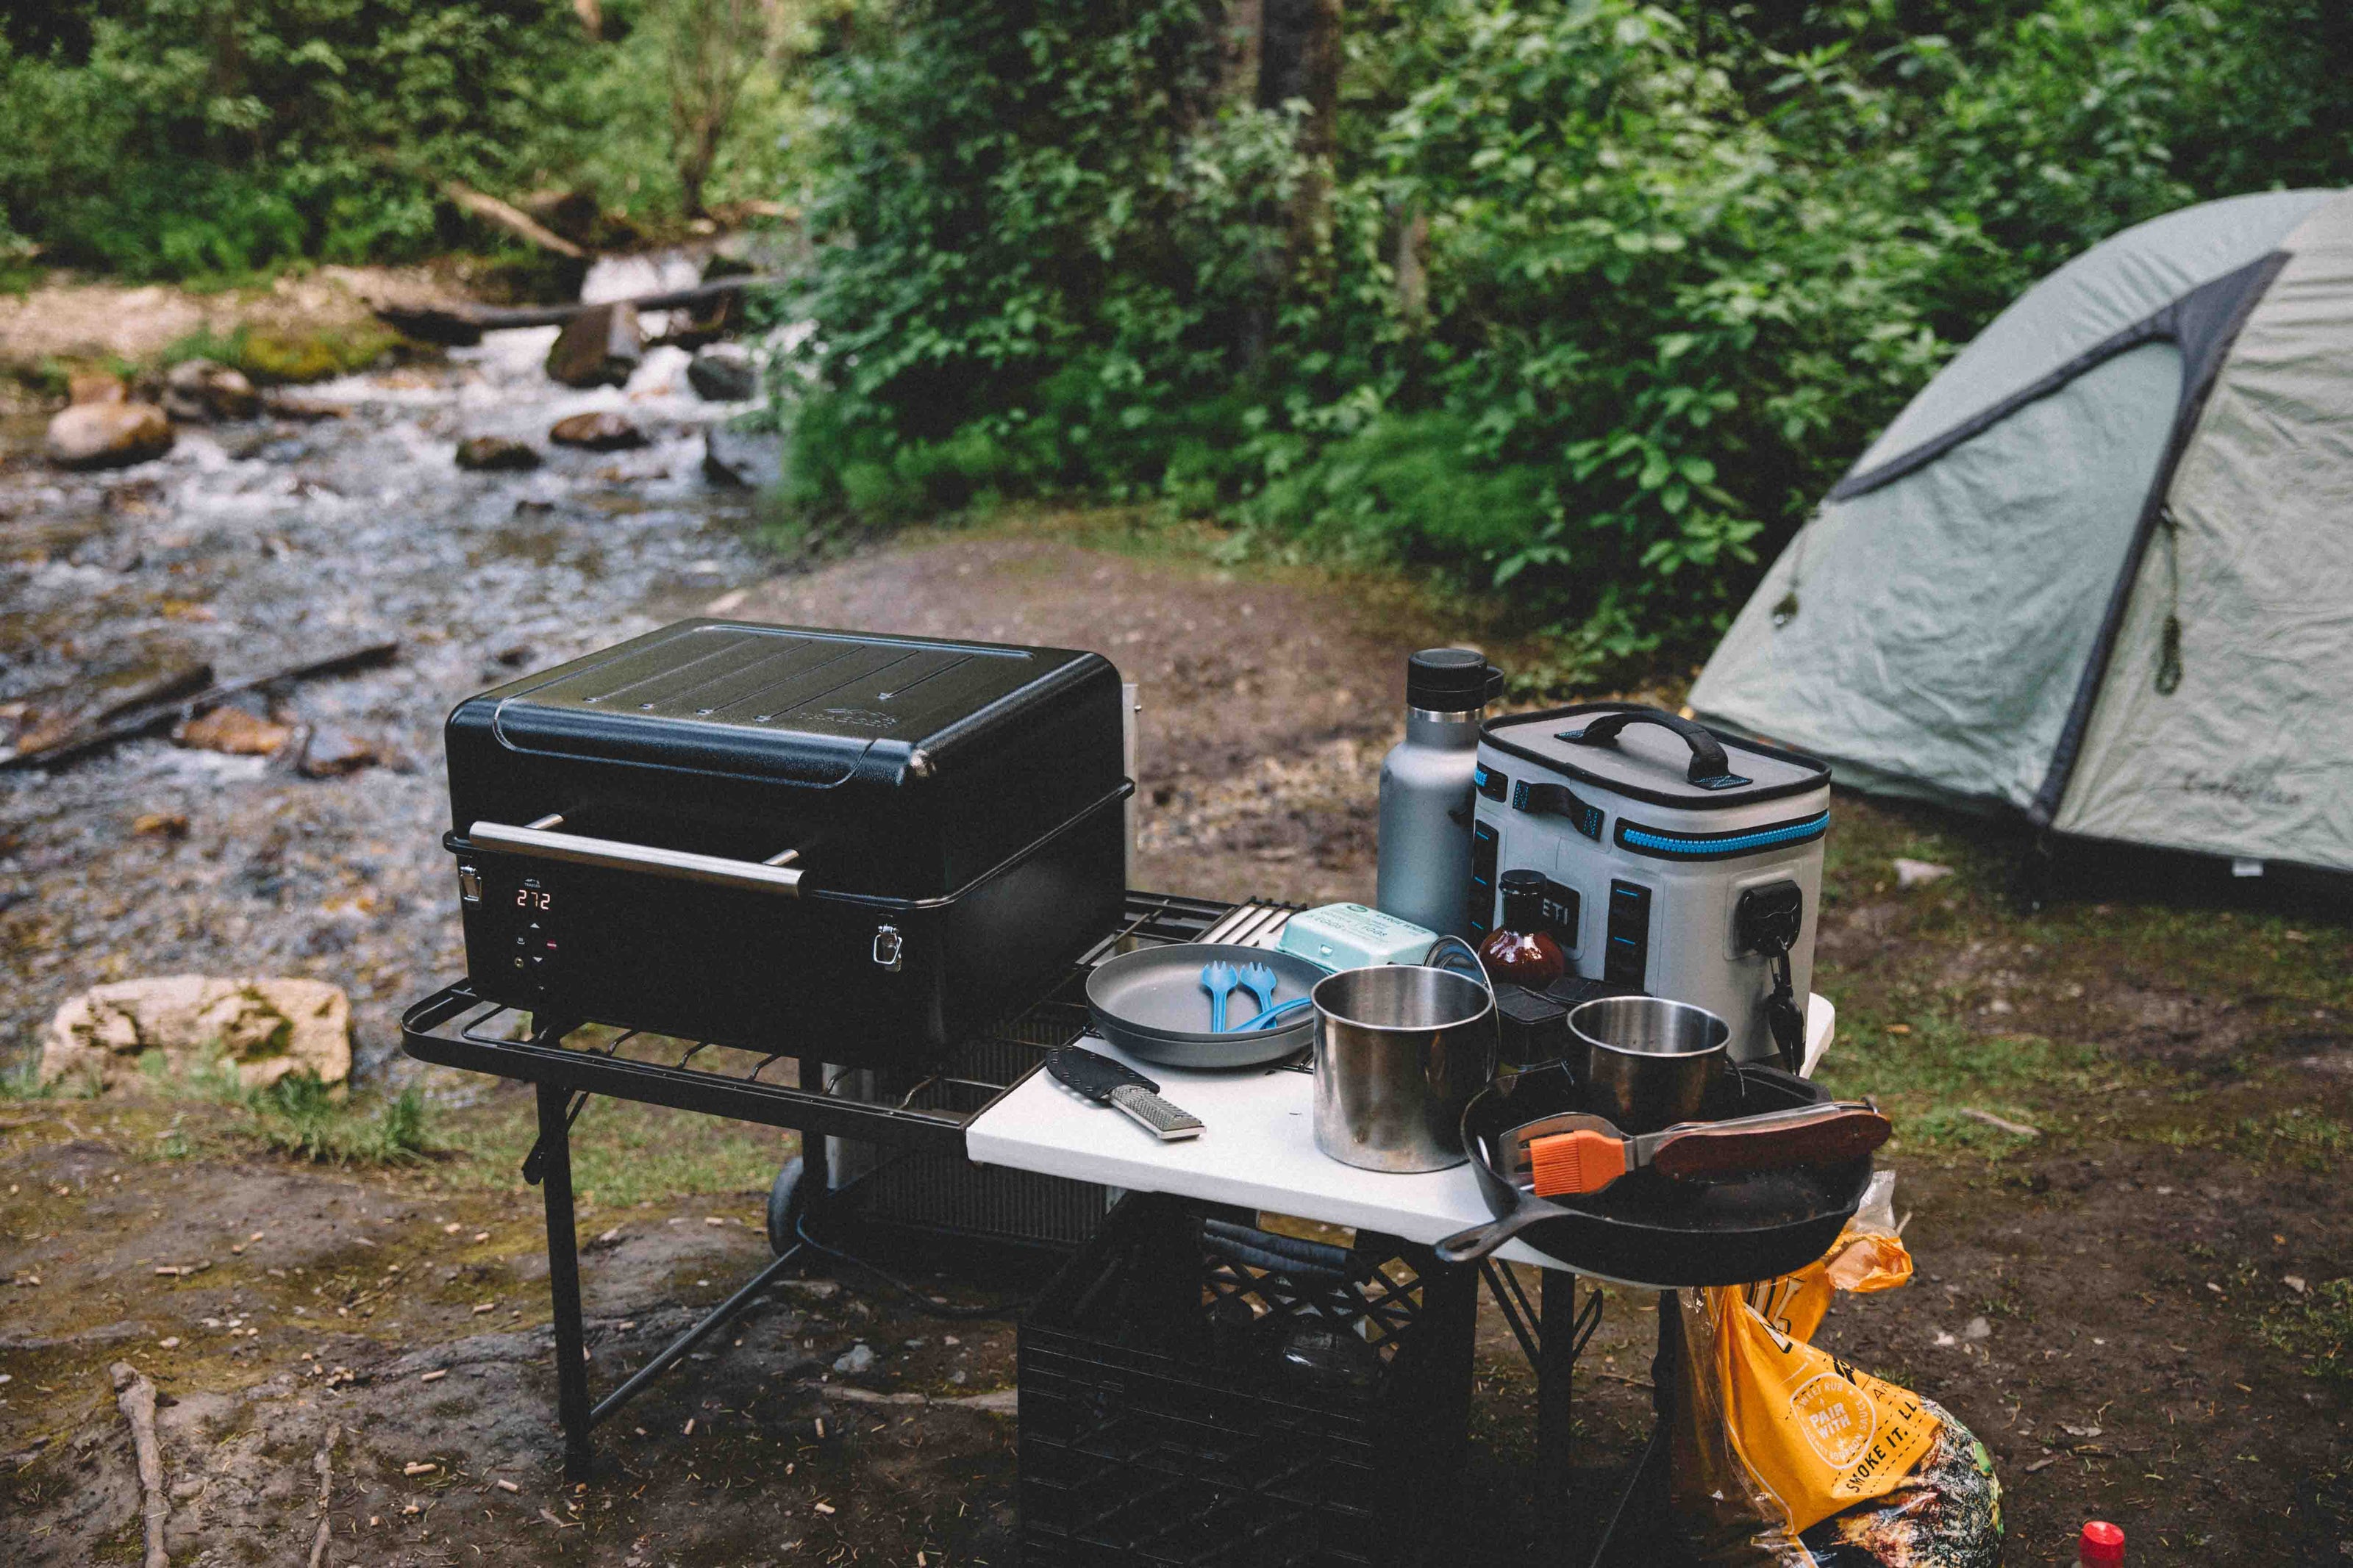 Camping barbecue equipment next to a stream